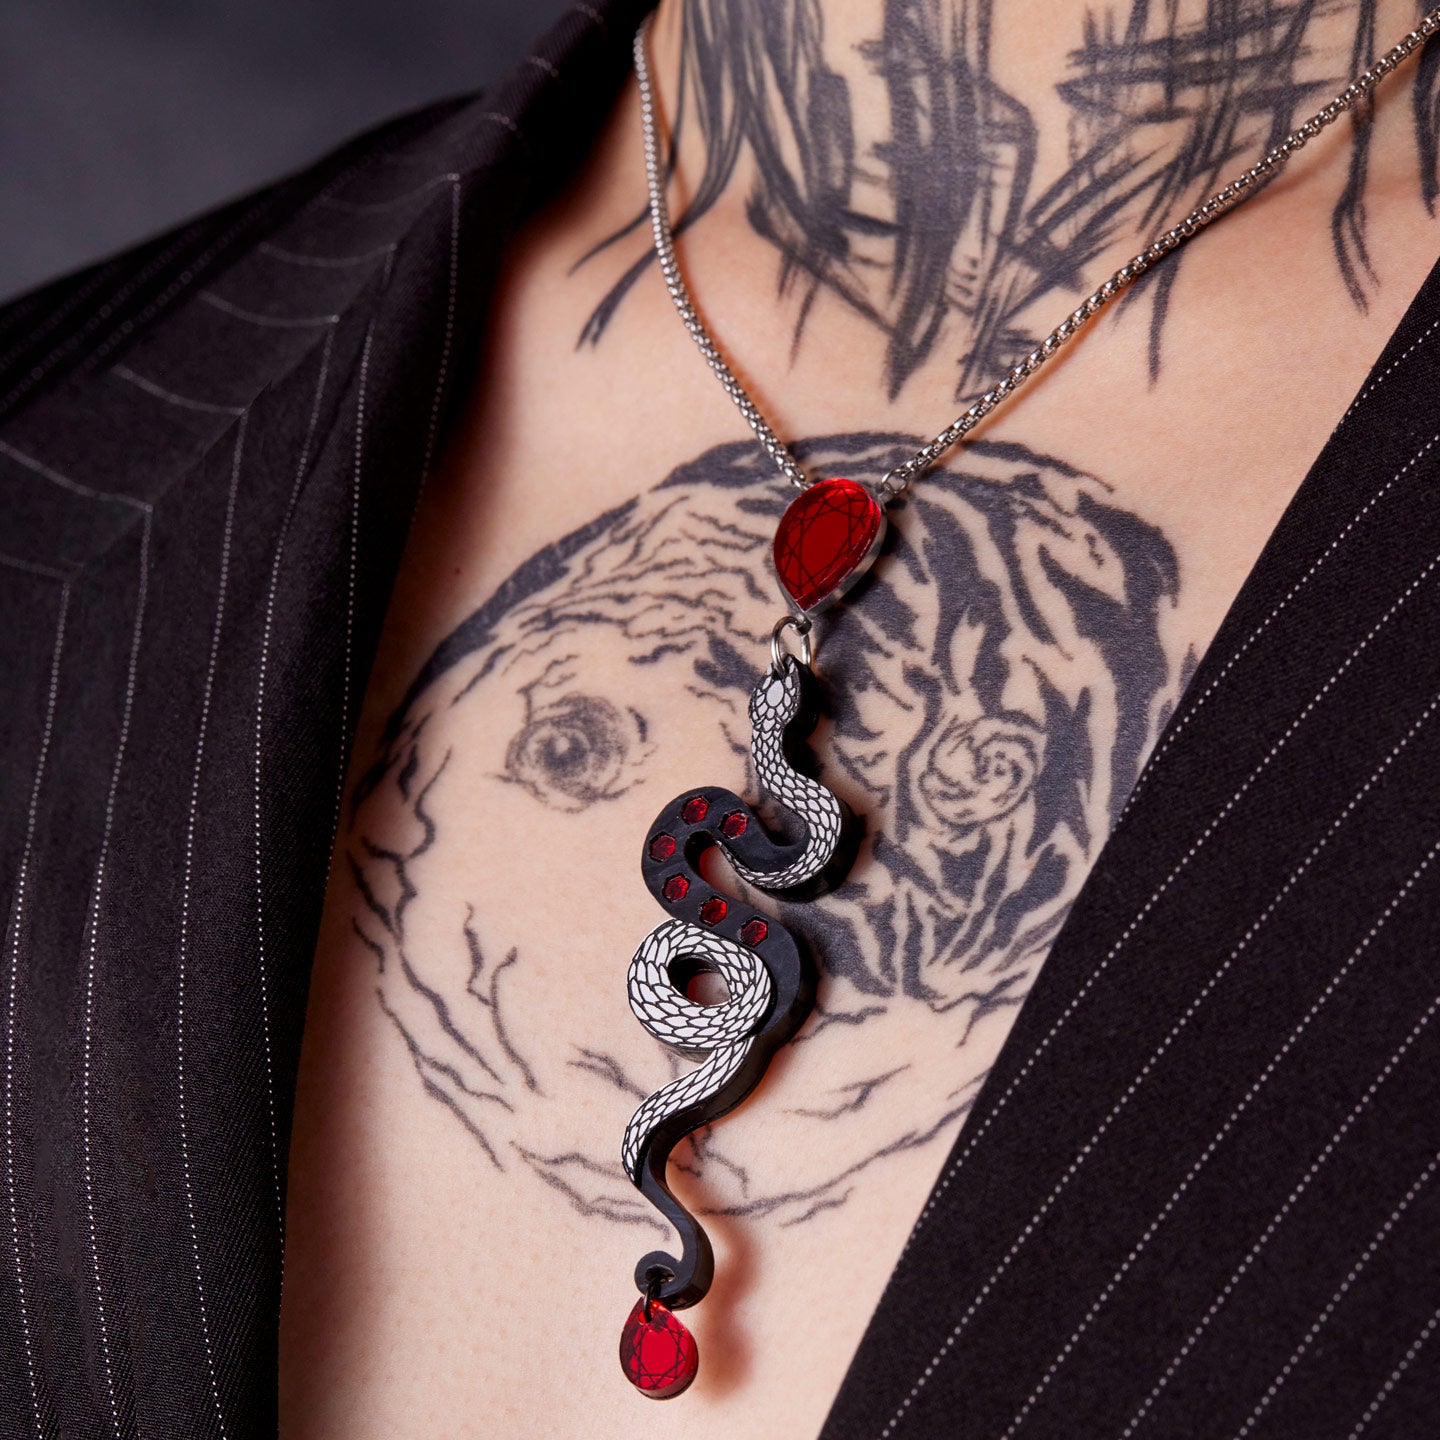 Elegant and Powerful Snake Tattoos for Women